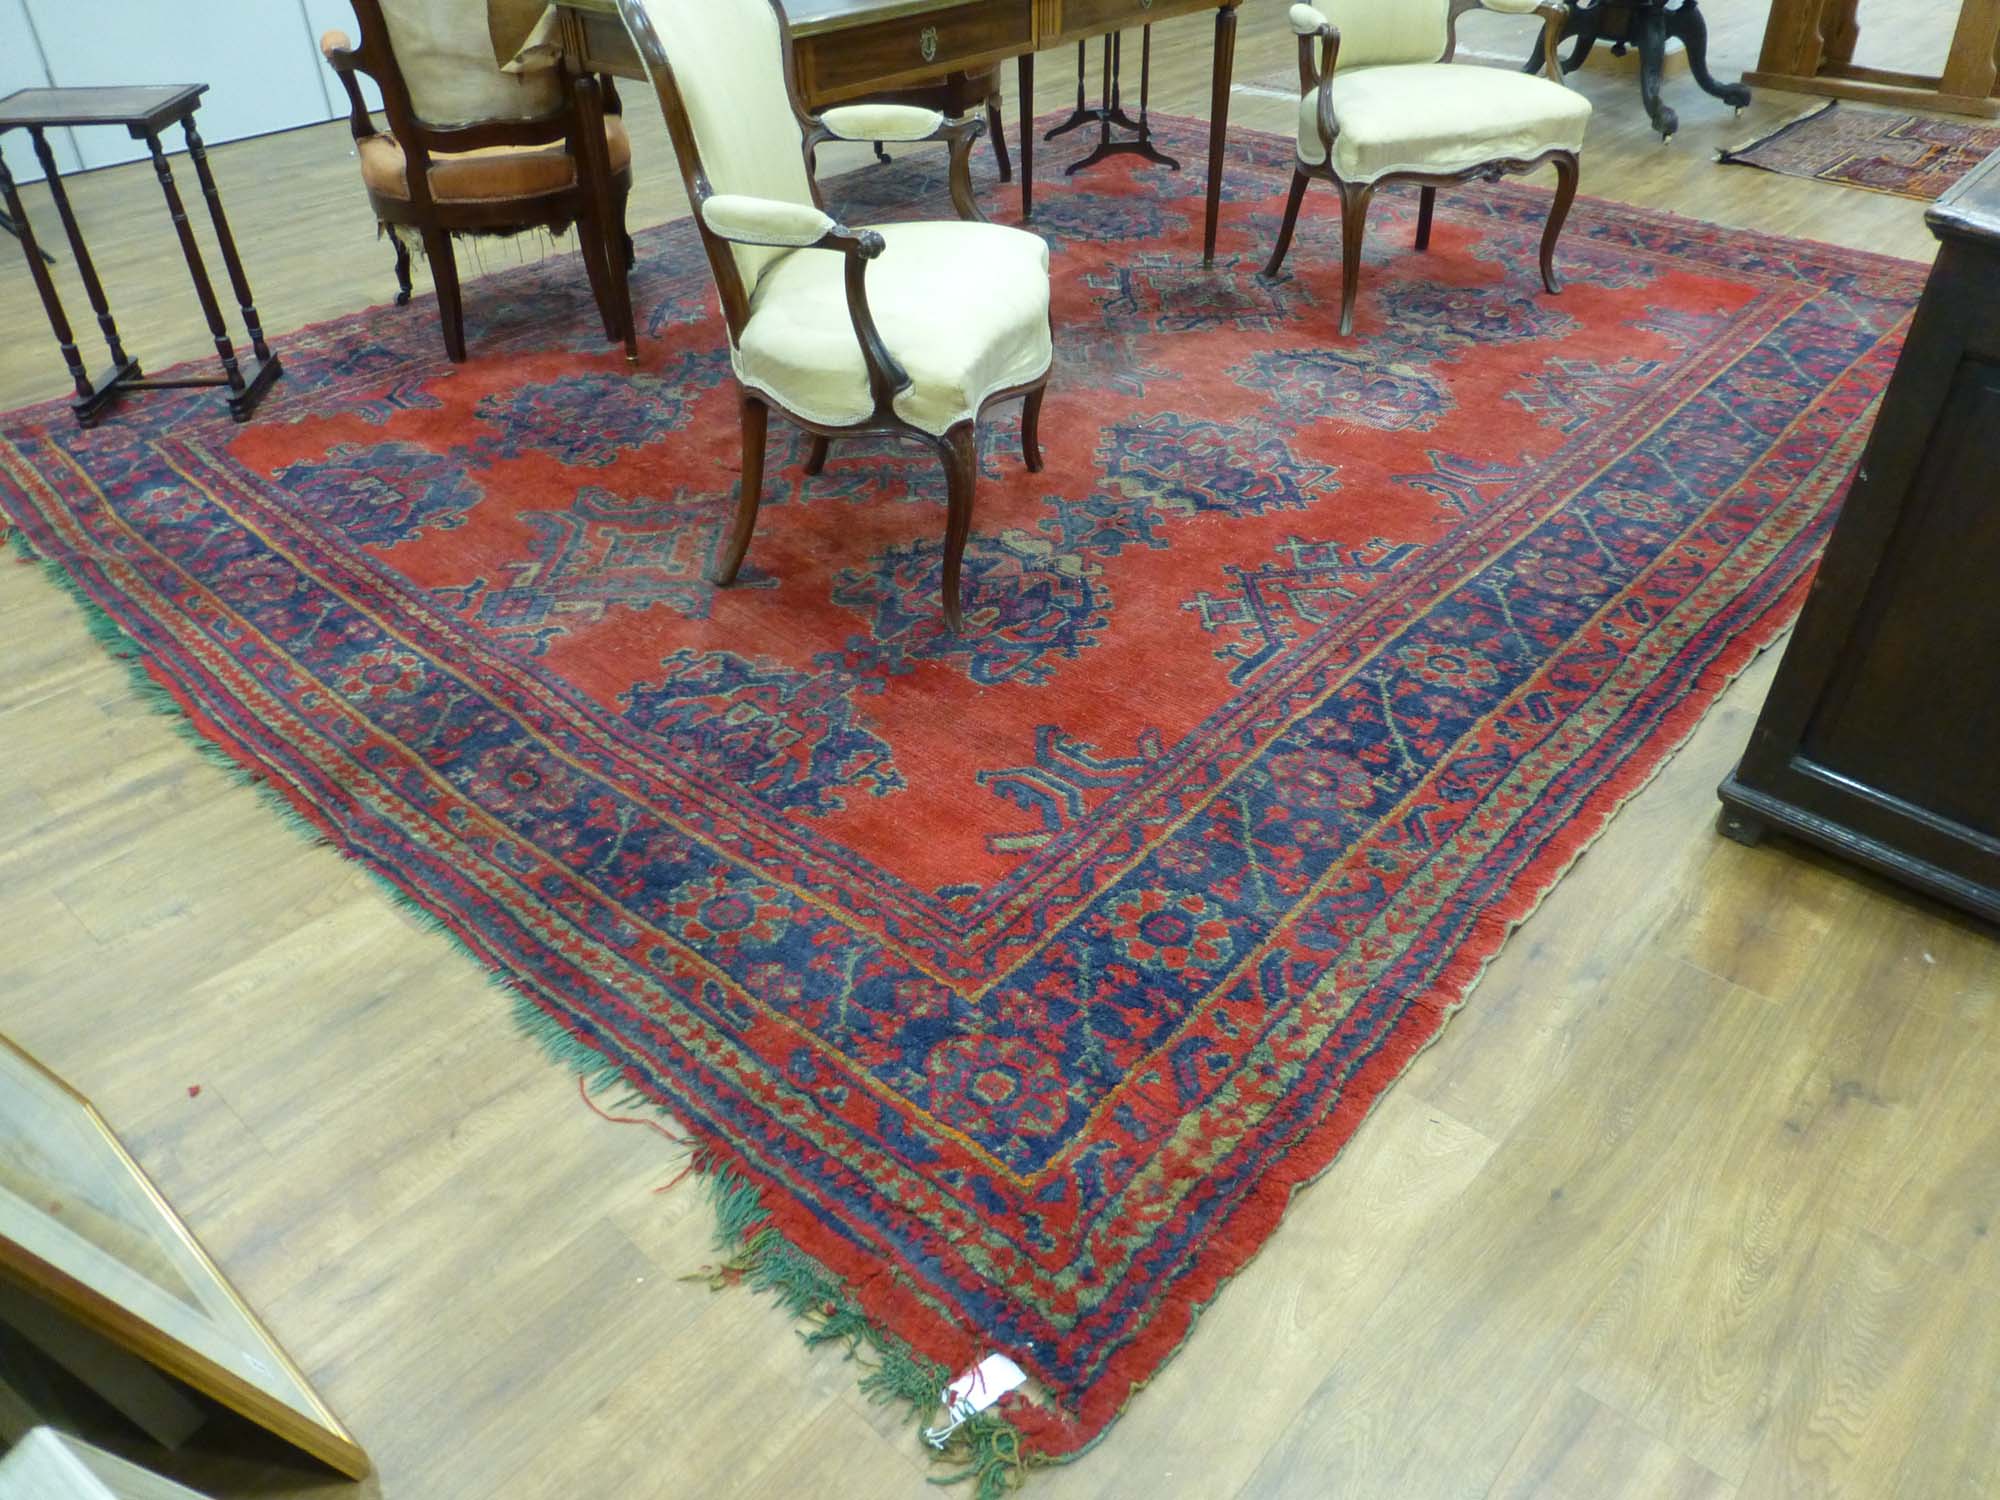 An early 20th century red ground rug with repeated motifs within red and blue bands, - Image 3 of 8